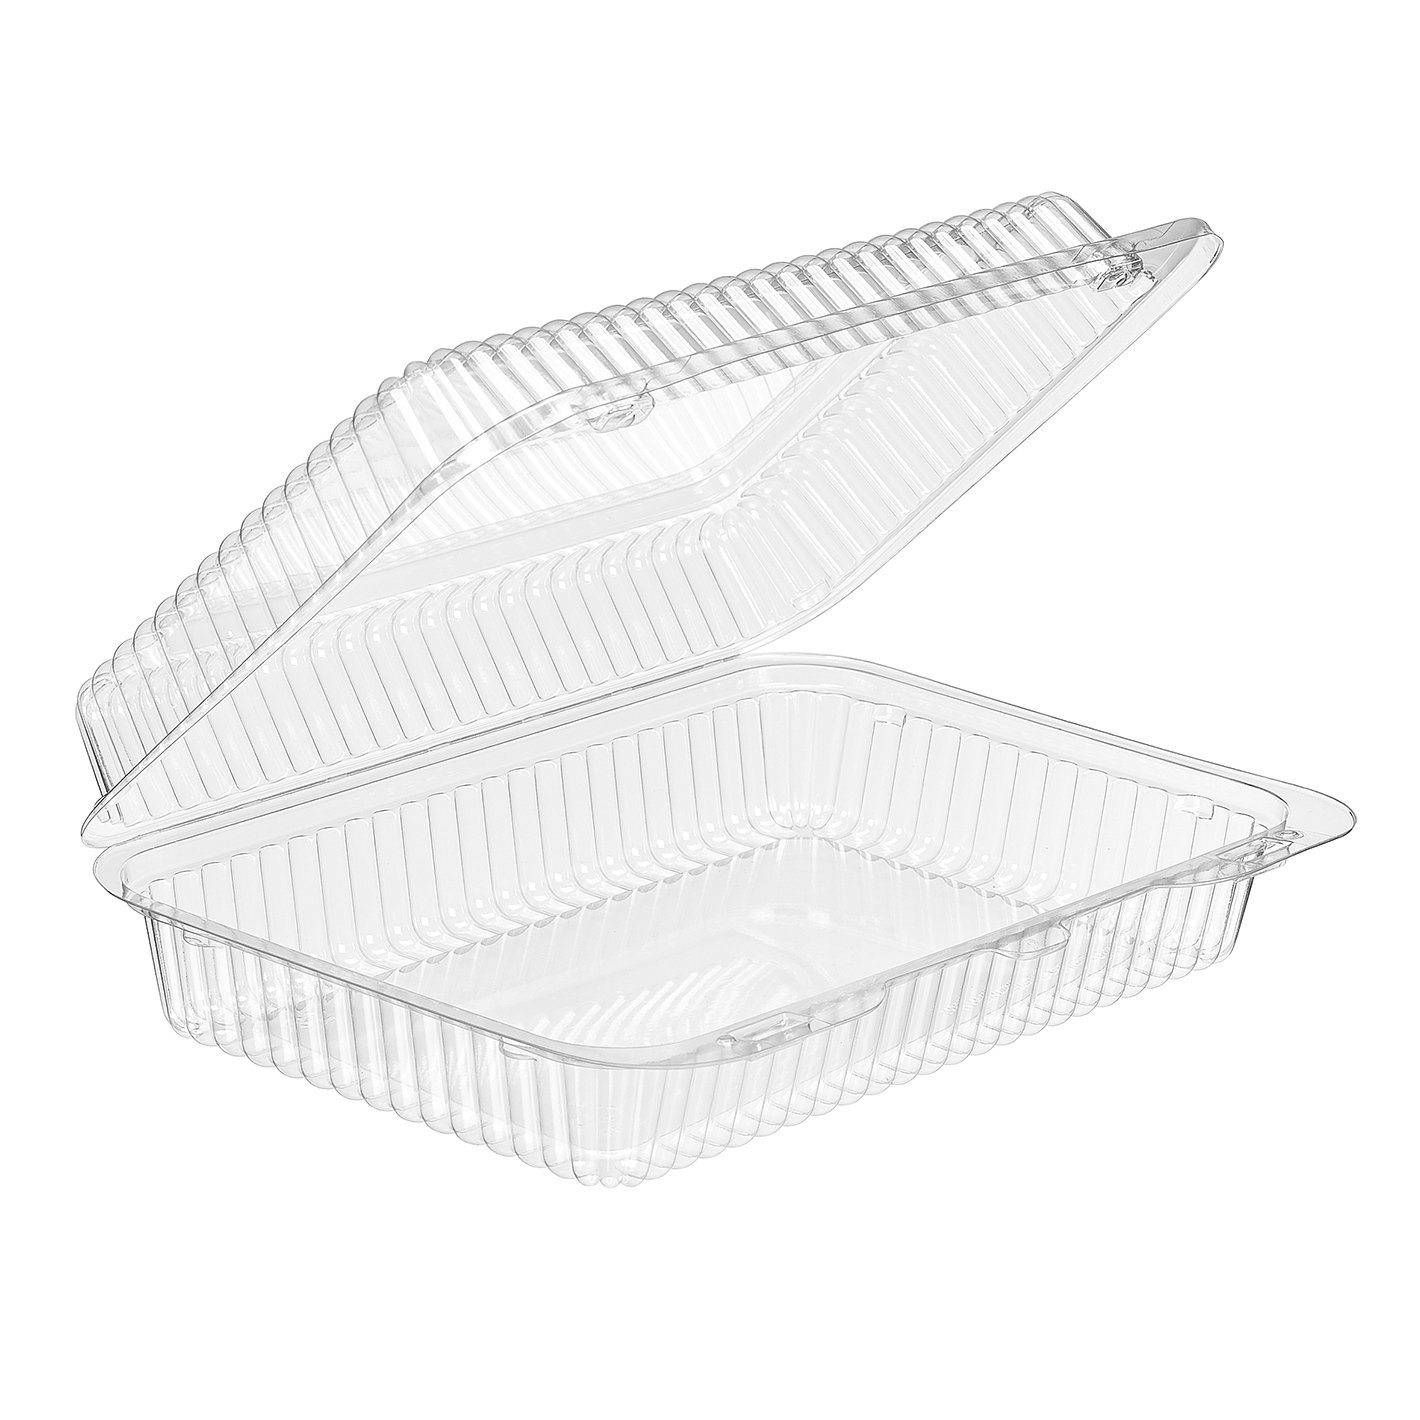 SLP32 9.37 x 6.75 x 2.62 Hinged Clamshell Oblong Container 300/case